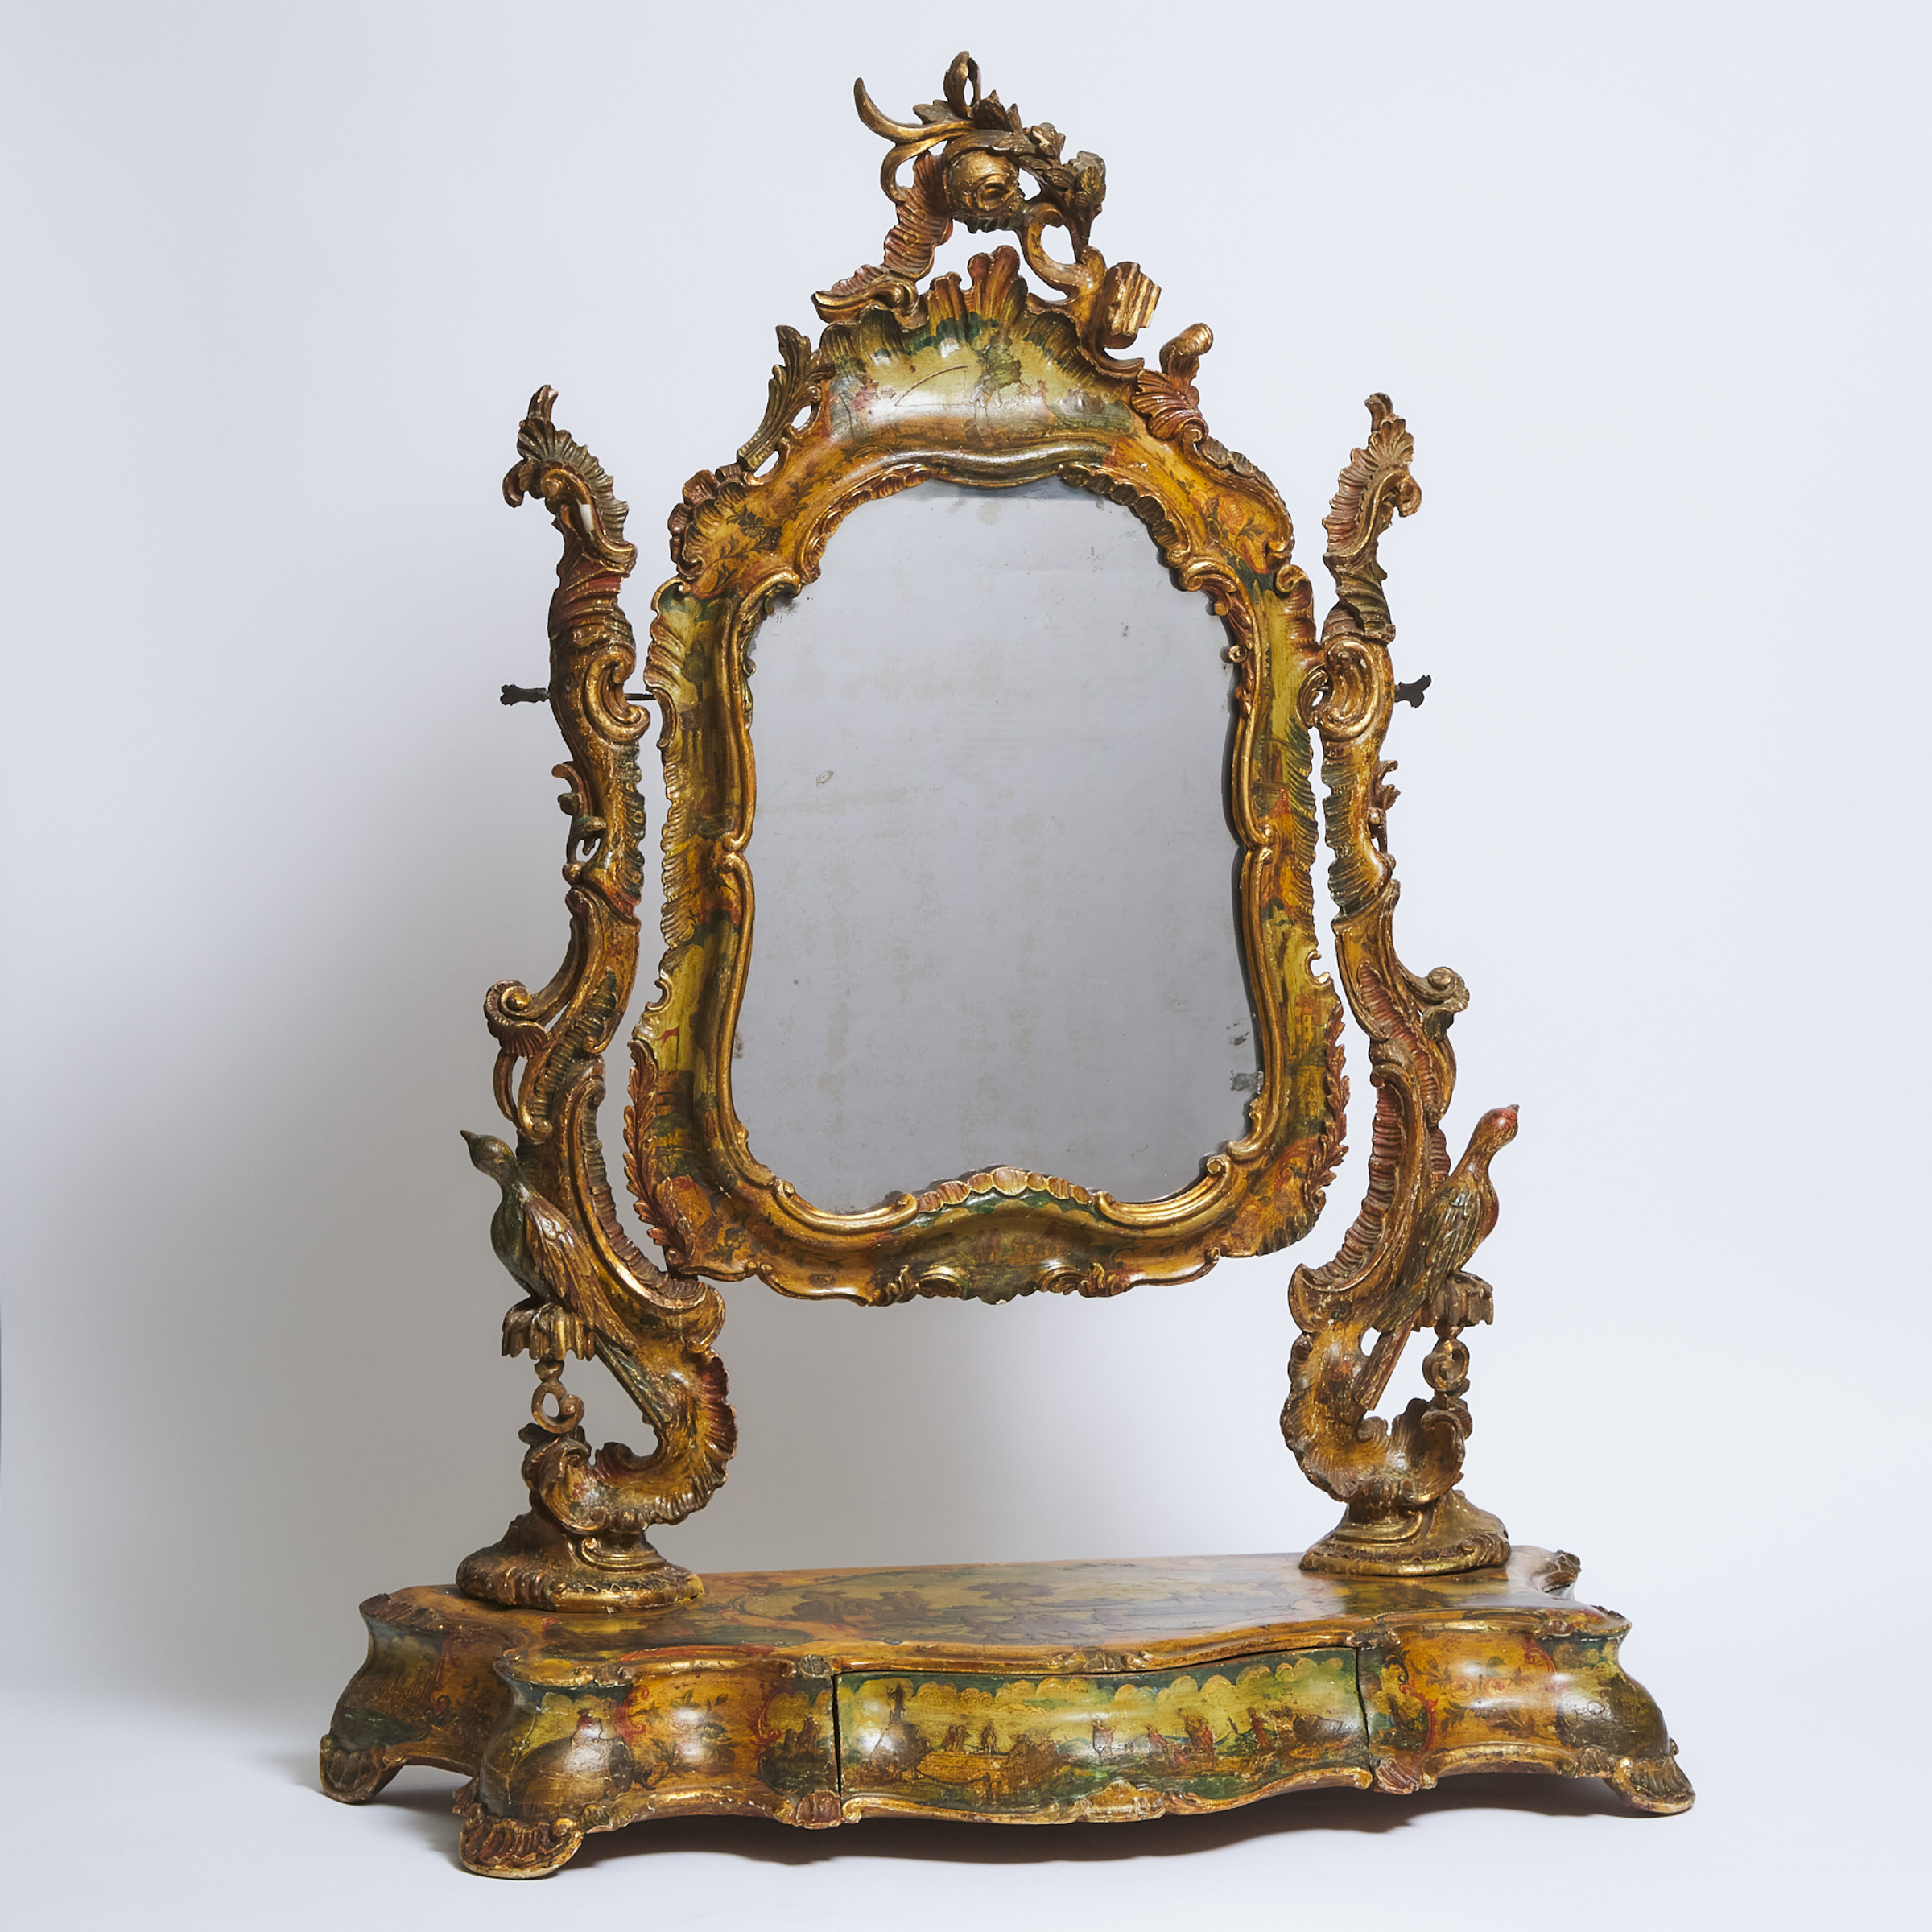 Large Venetian Chinoiserie 'Arte Povera' Découpage and Paint Decorated Parcel Gilt Rococo Dressing Mirror, c.1770